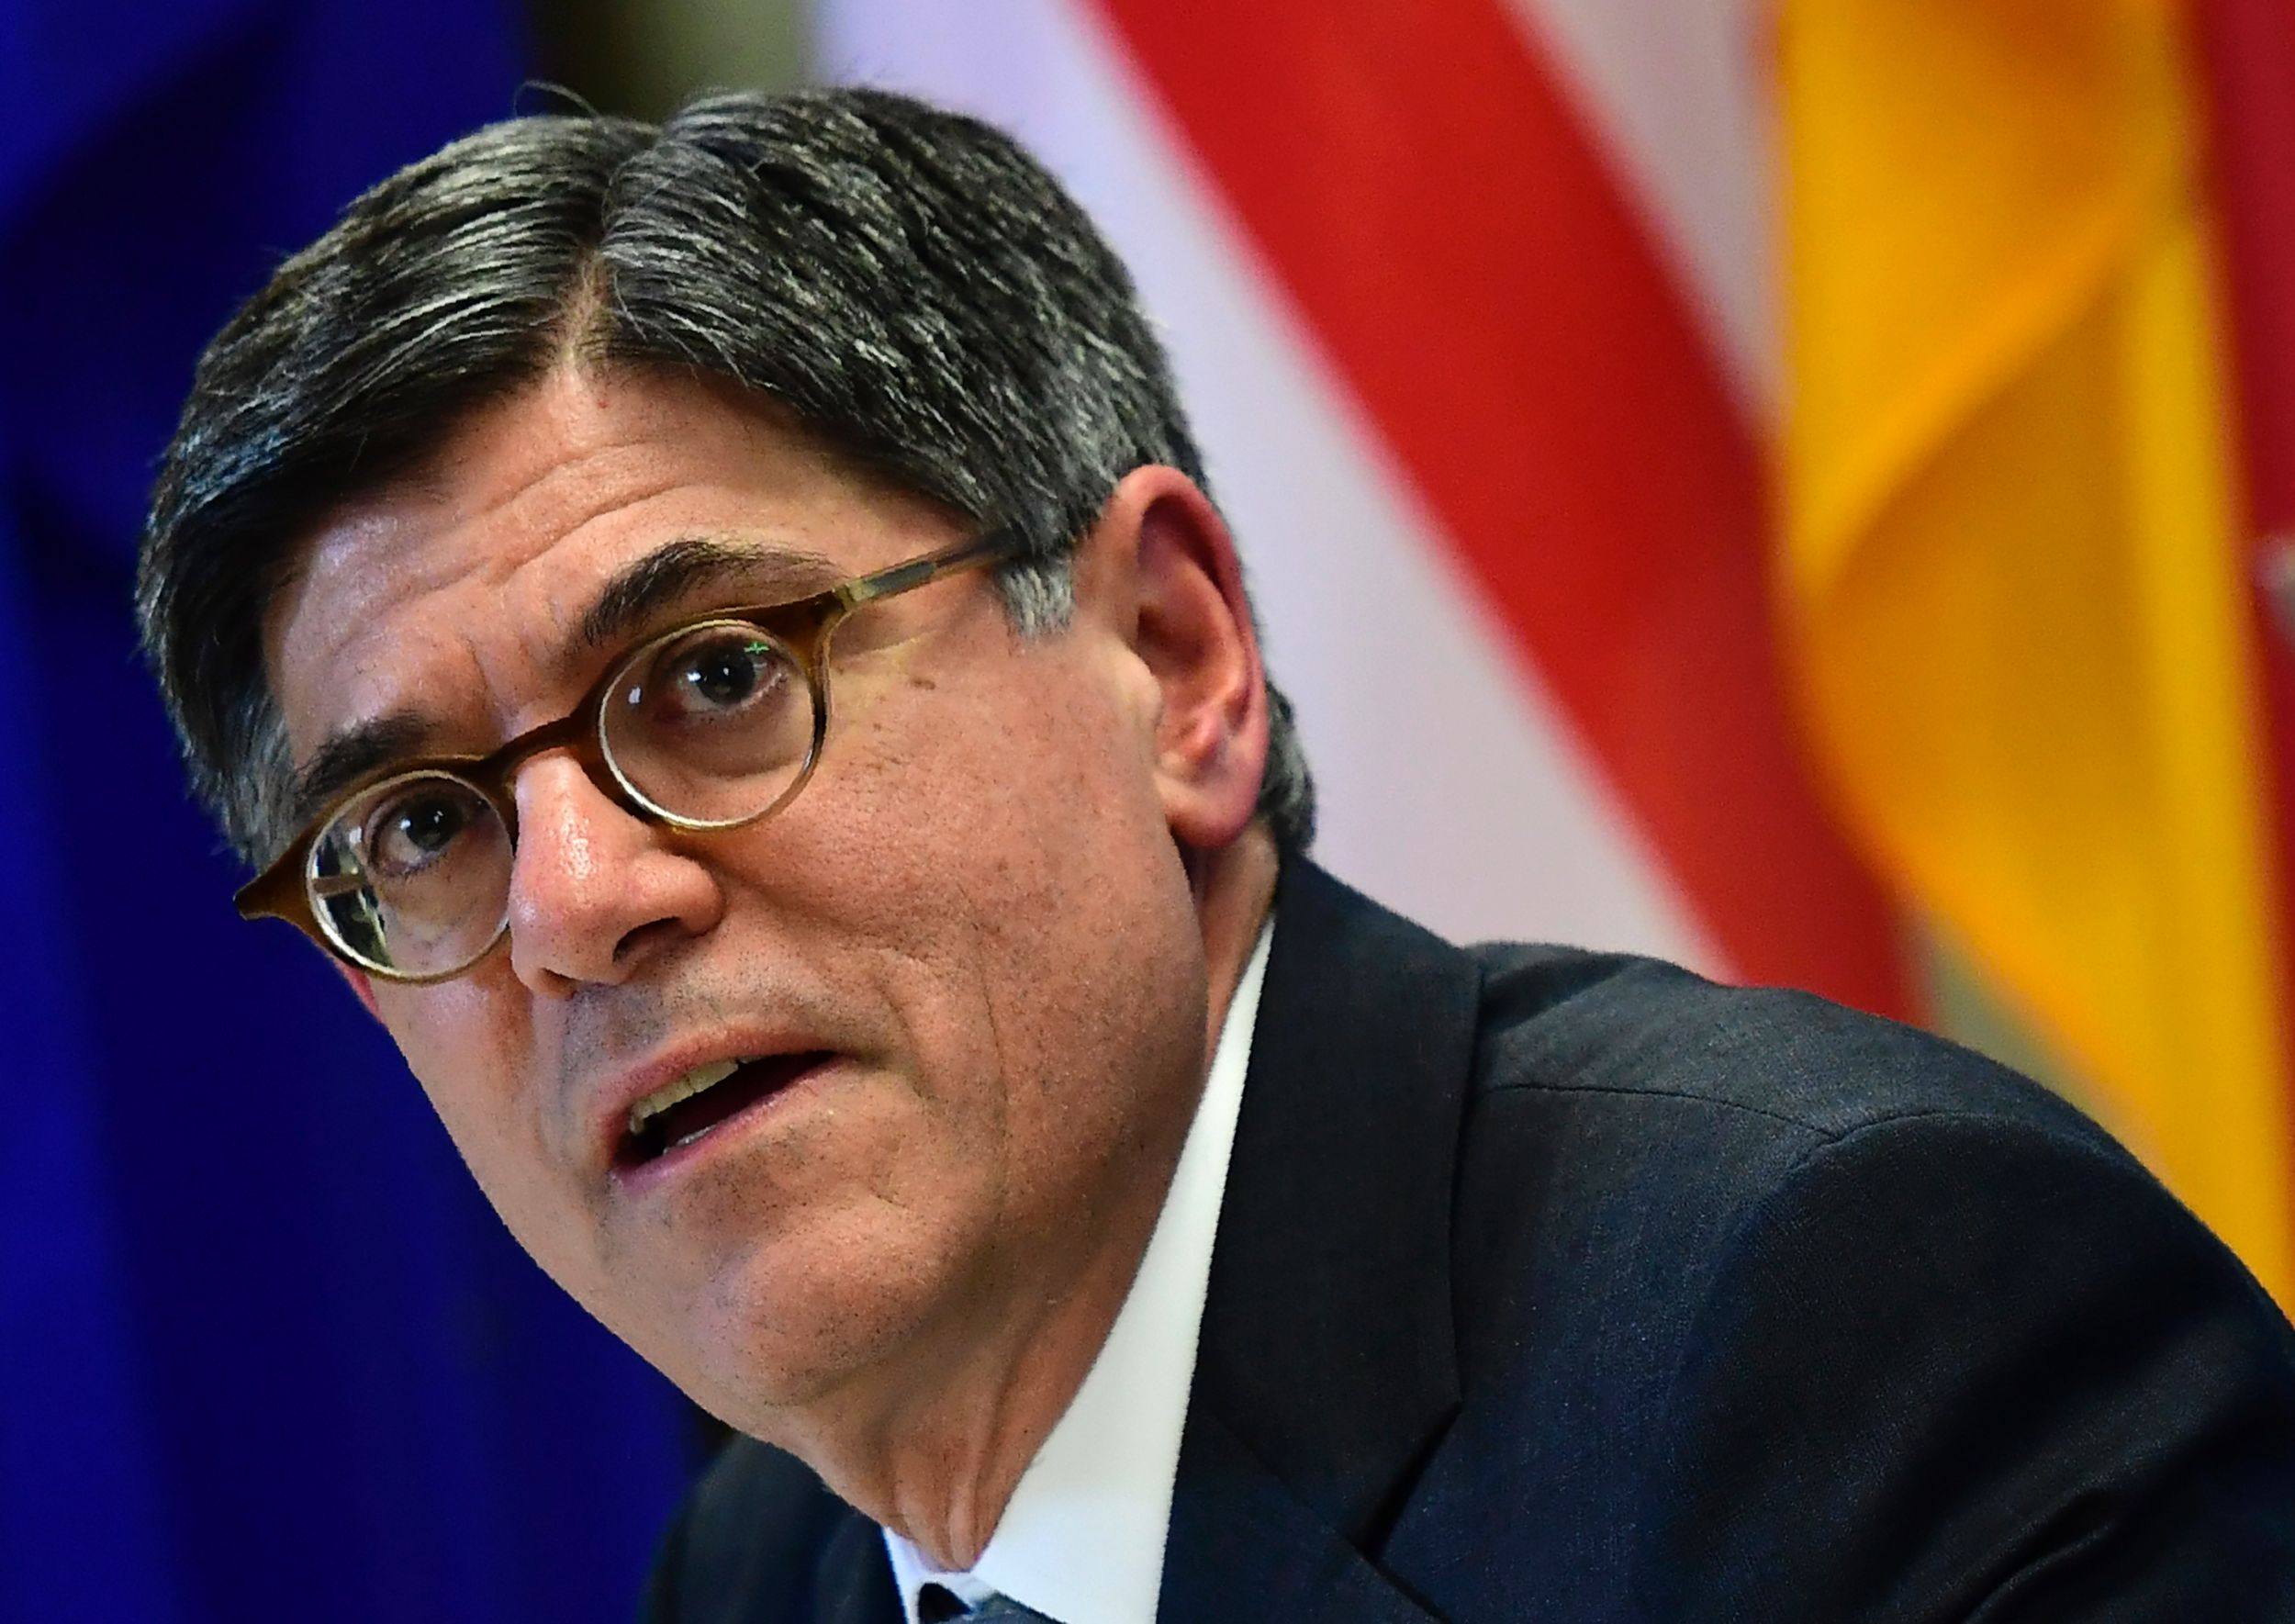 Former US Treasury Secretary Jack Lew, who also served as Barack Obama’s budget director and as White House chief of staff. Photo: AFP